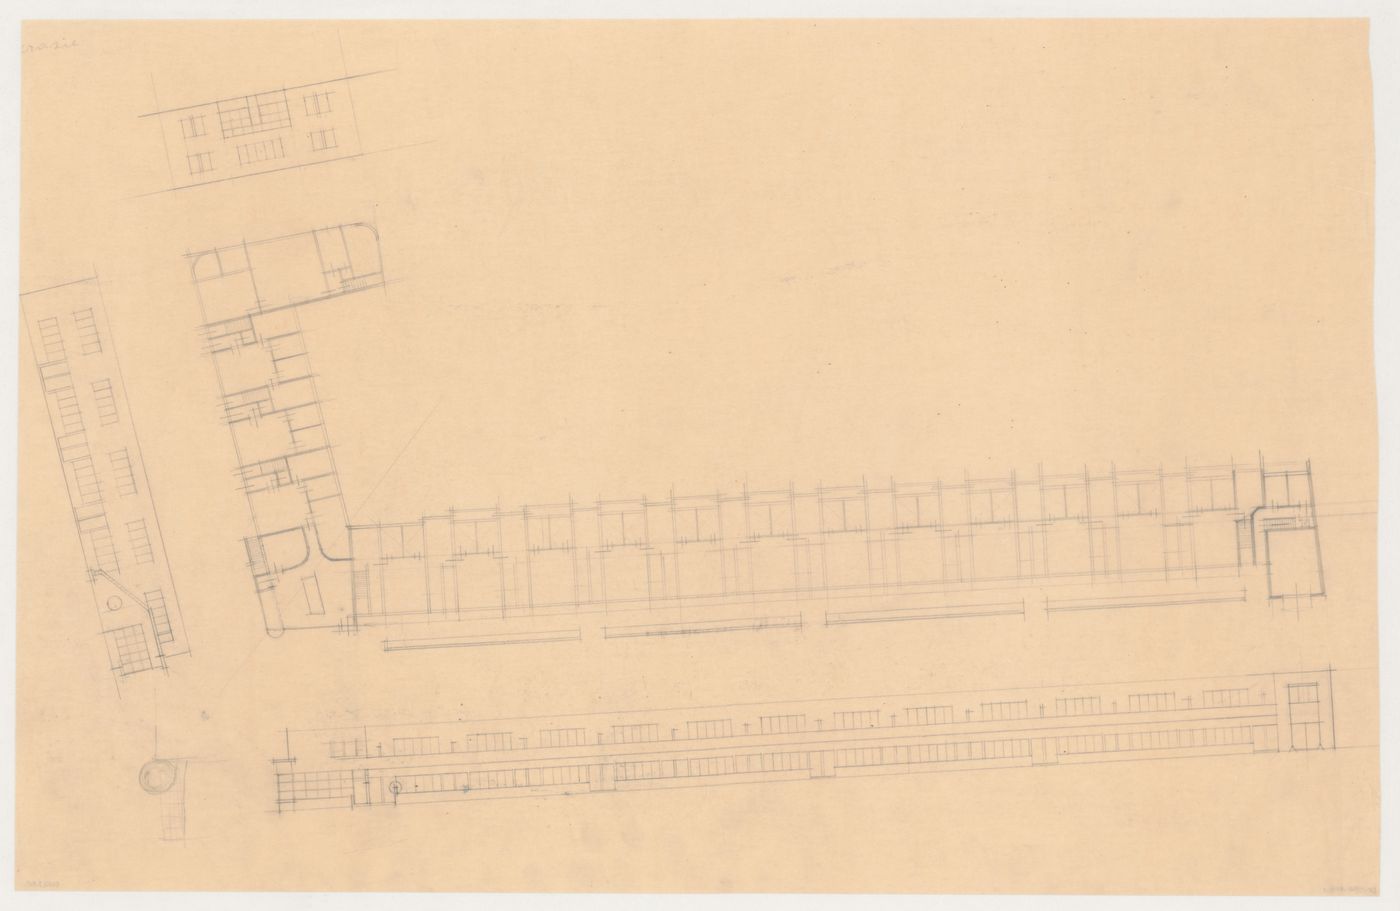 Plan and principal, lateral and rear elevations for industrial row houses, Hoek van Holland, Netherlands